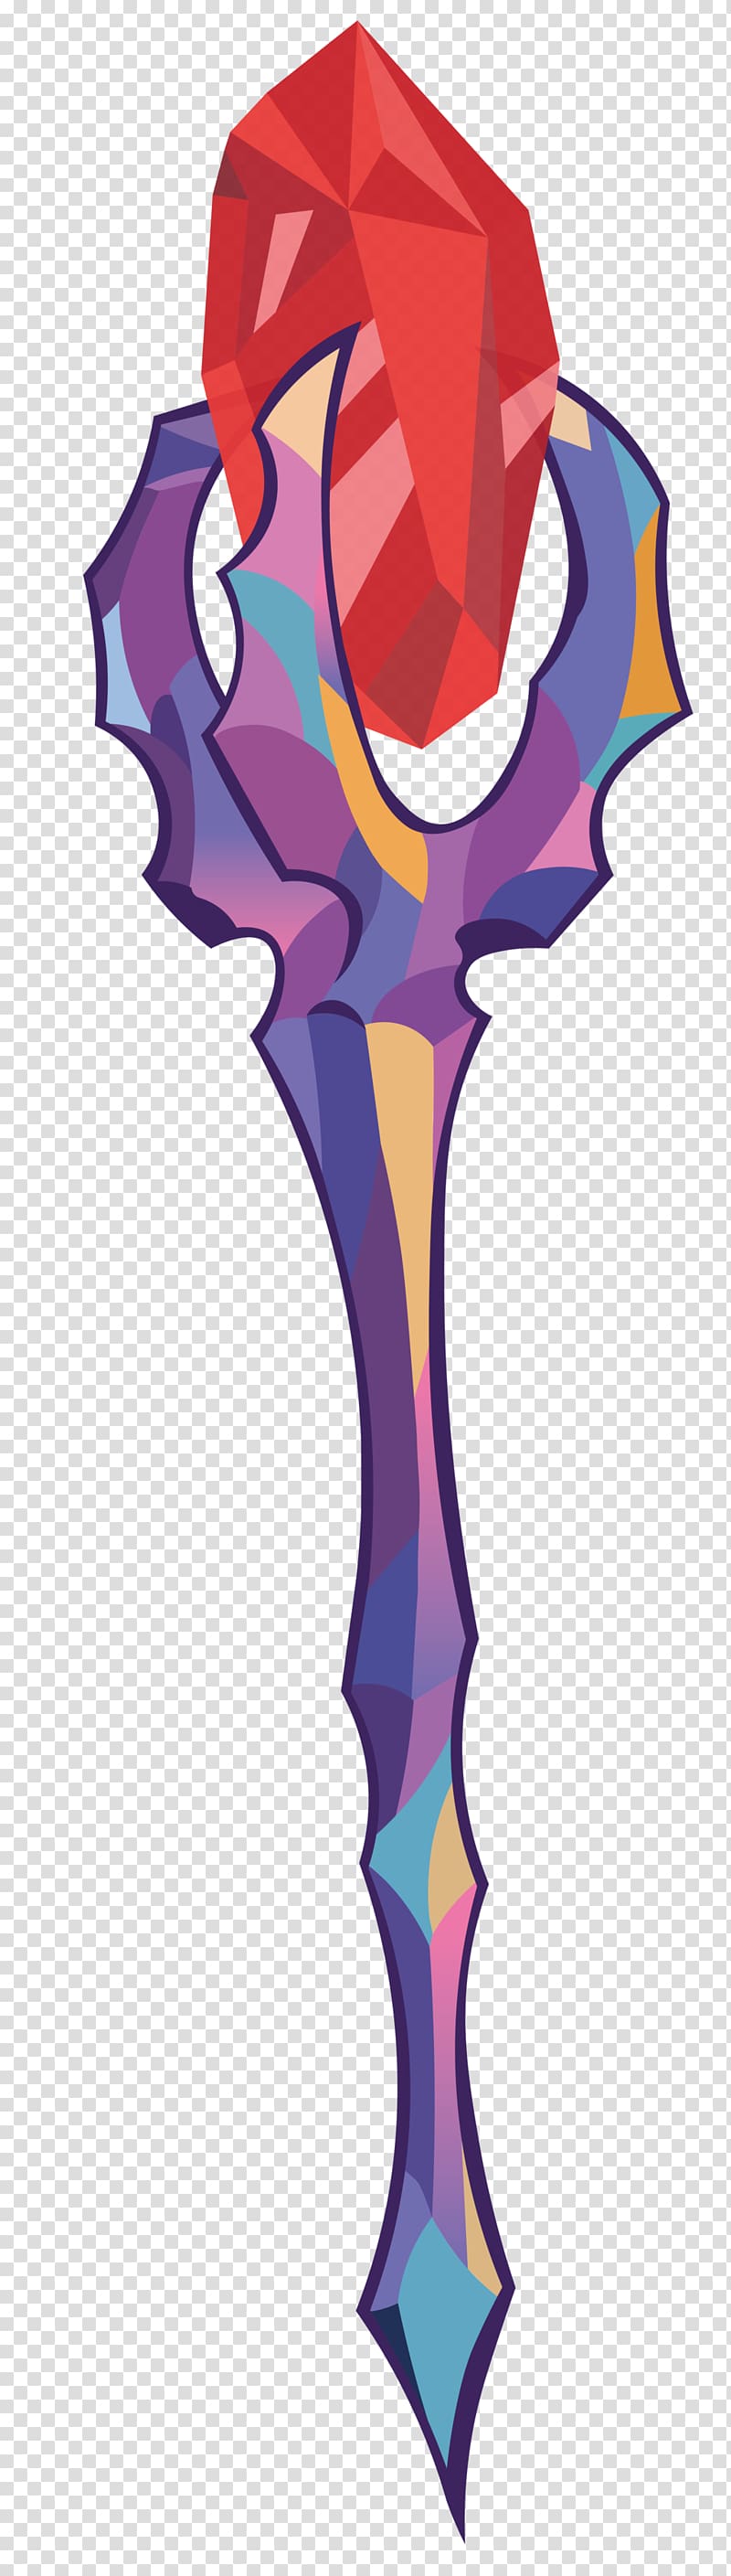 Sceptre Gauntlet of Fire My Little Pony: Friendship Is Magic, Season 6 Art, others transparent background PNG clipart